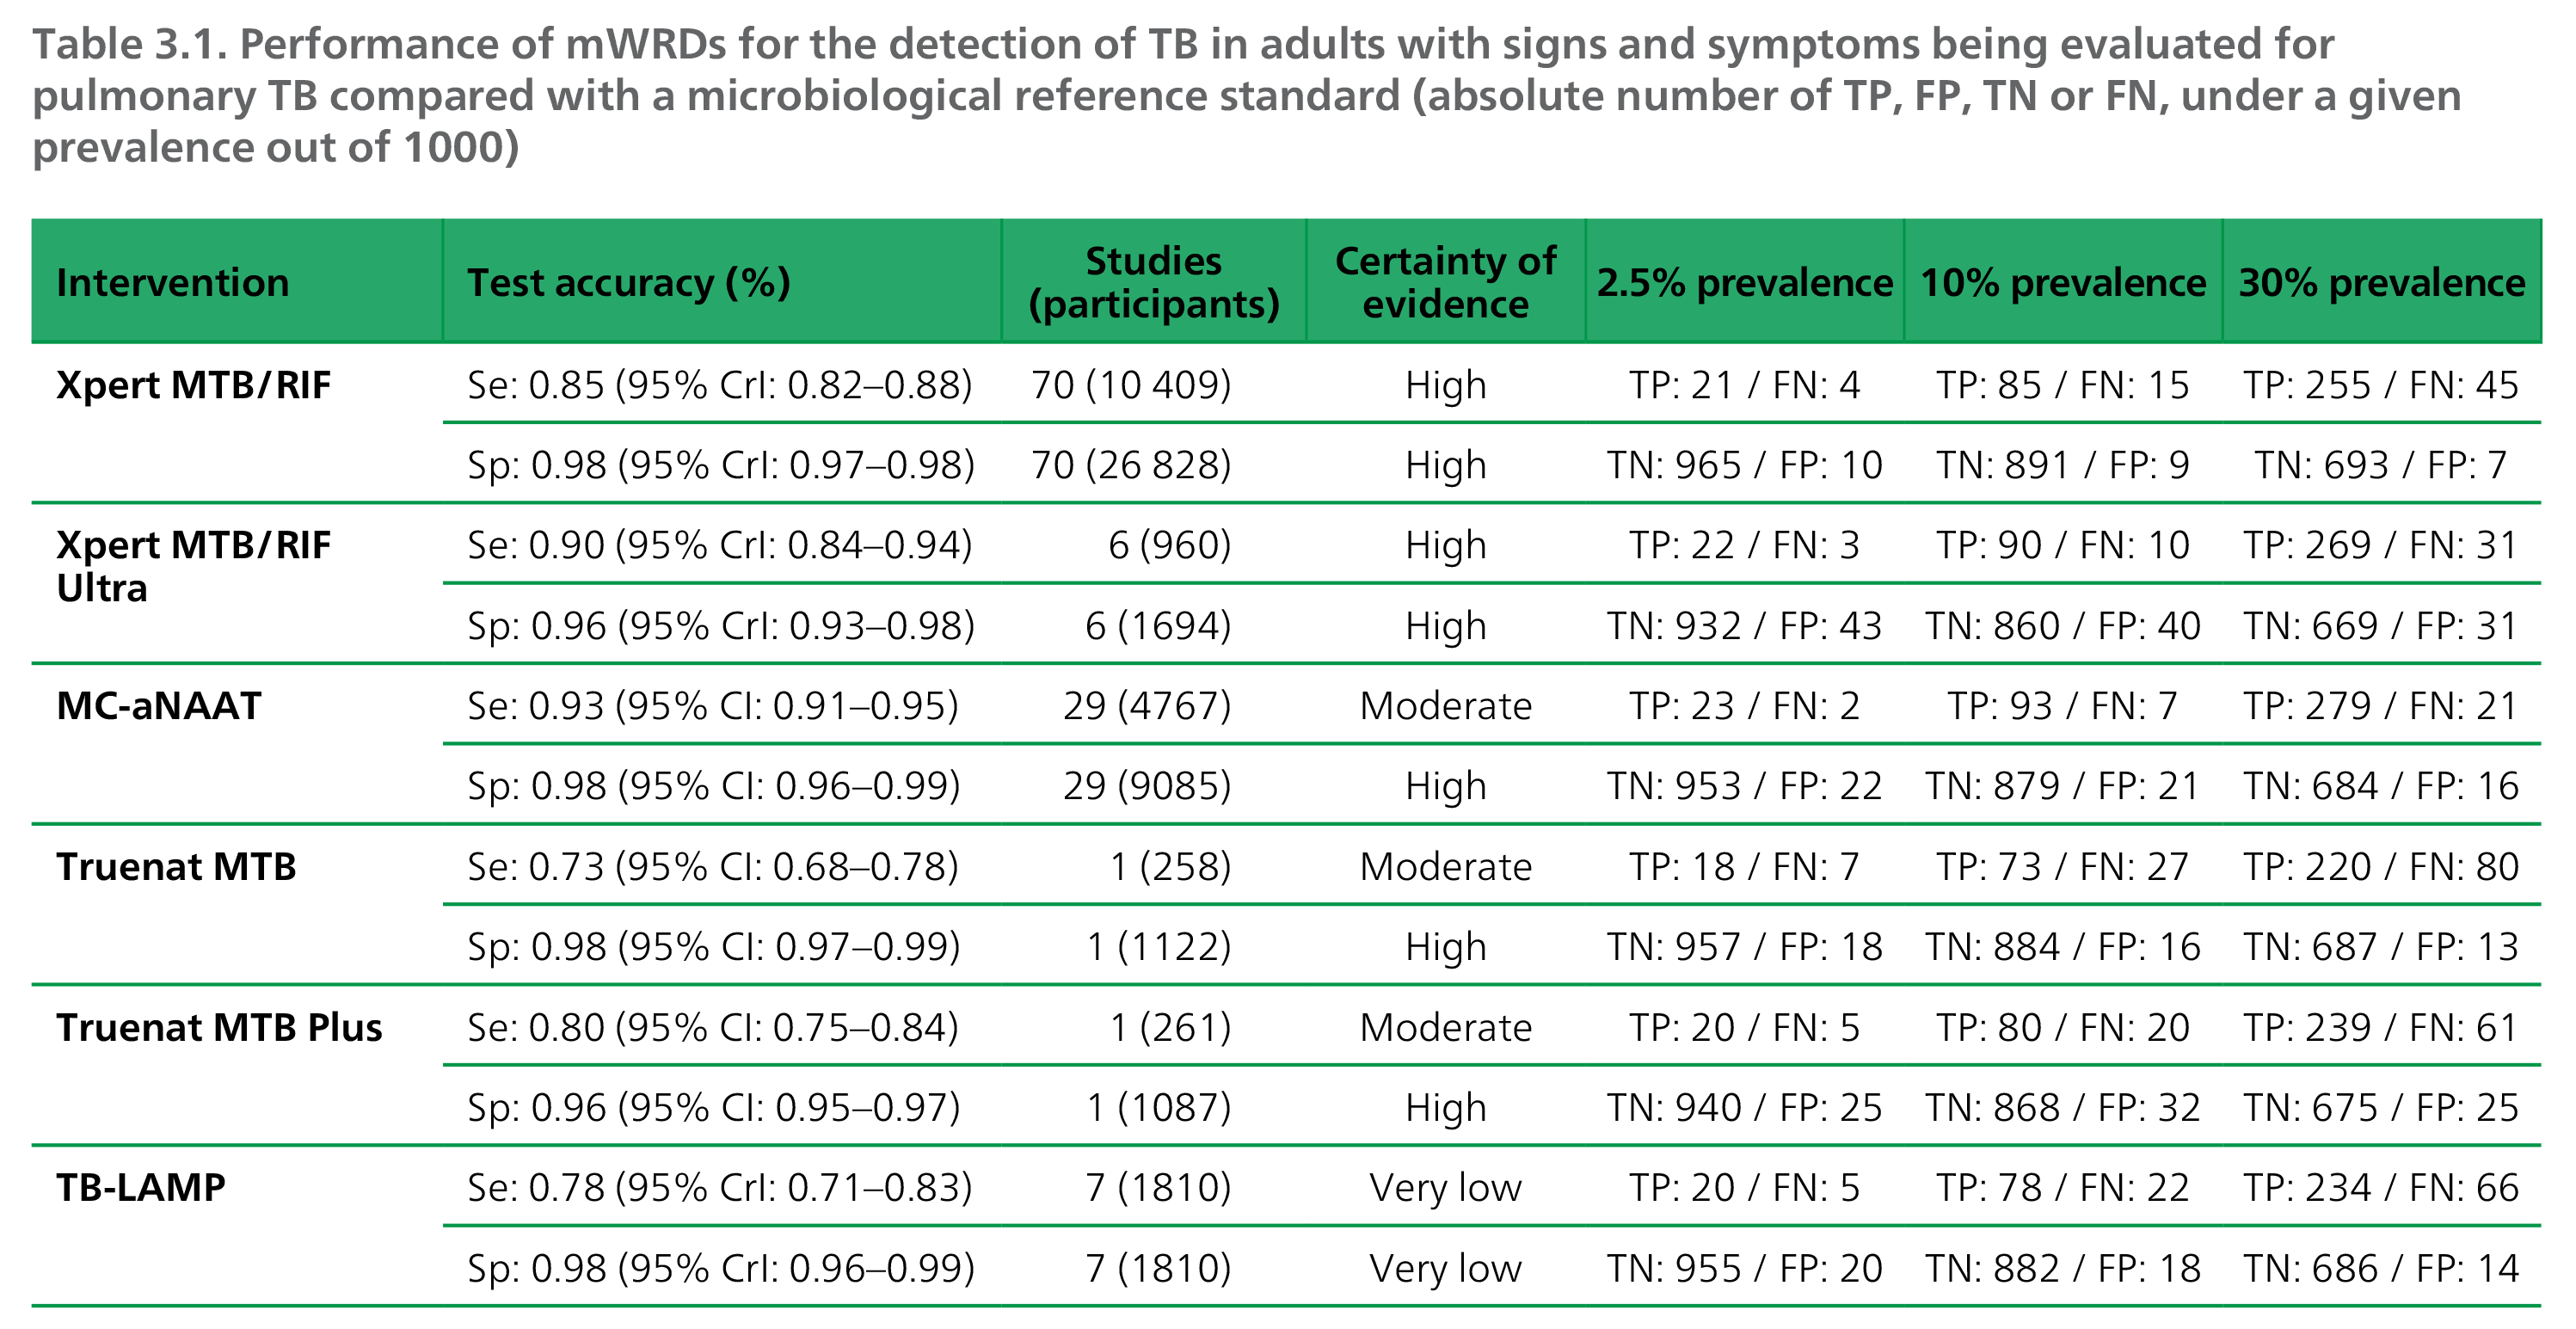 Performance of mWRDs for the detection of TB in adults